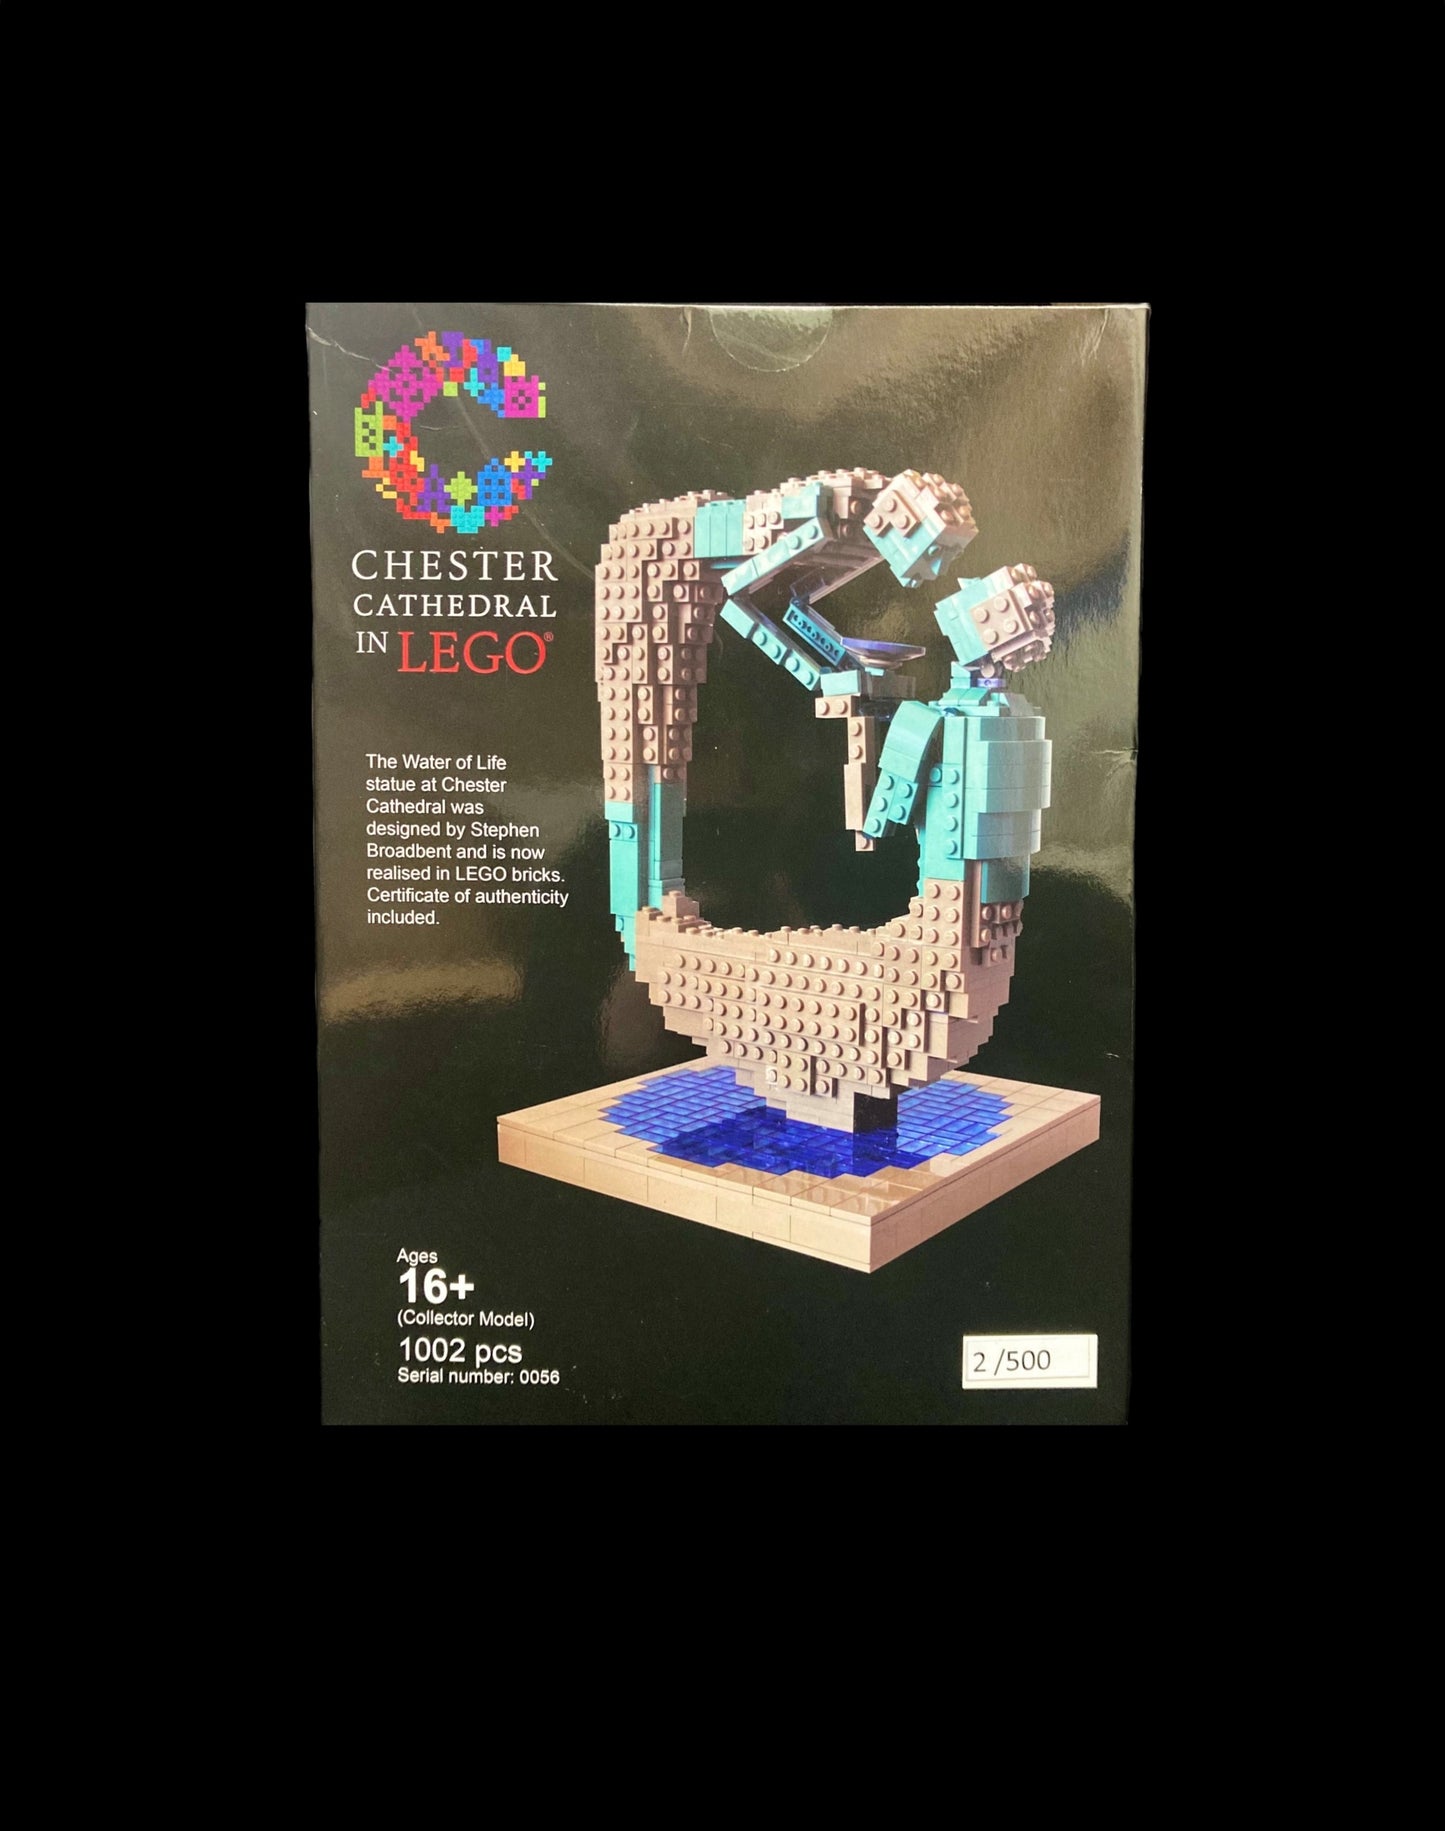 LEGO - The Water of Life Sculpture